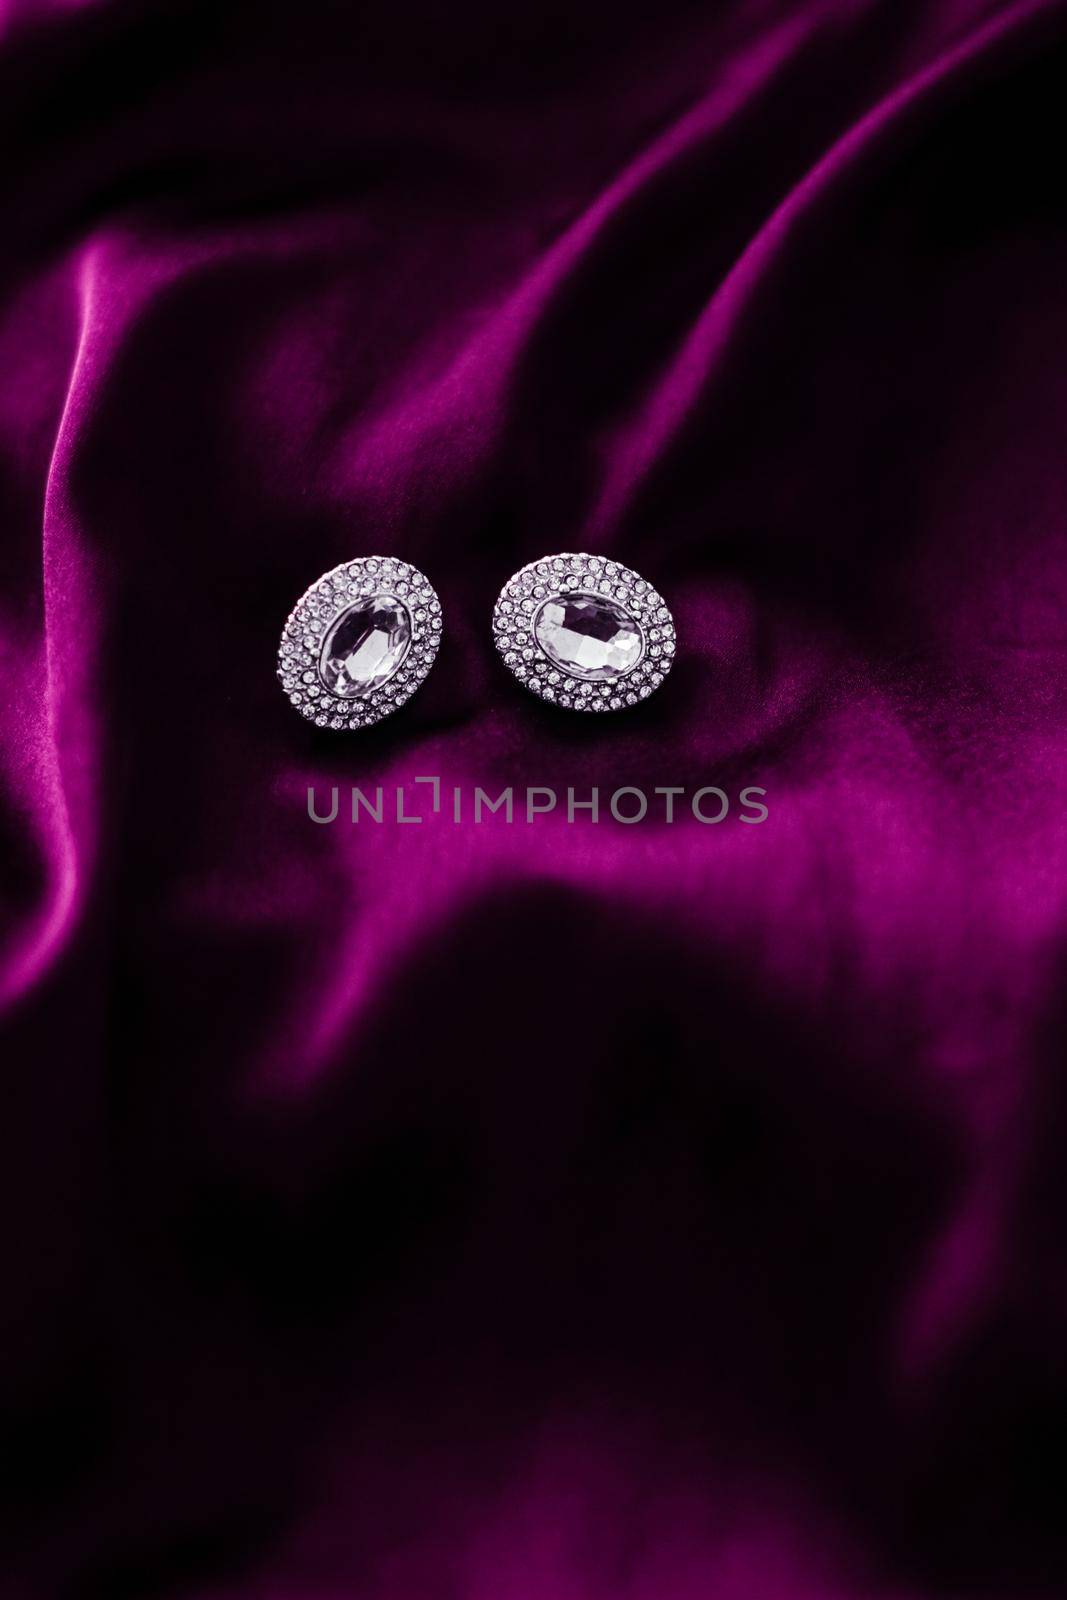 Luxury diamond earrings on dark pink silk fabric, holiday glamour jewelery present by Anneleven